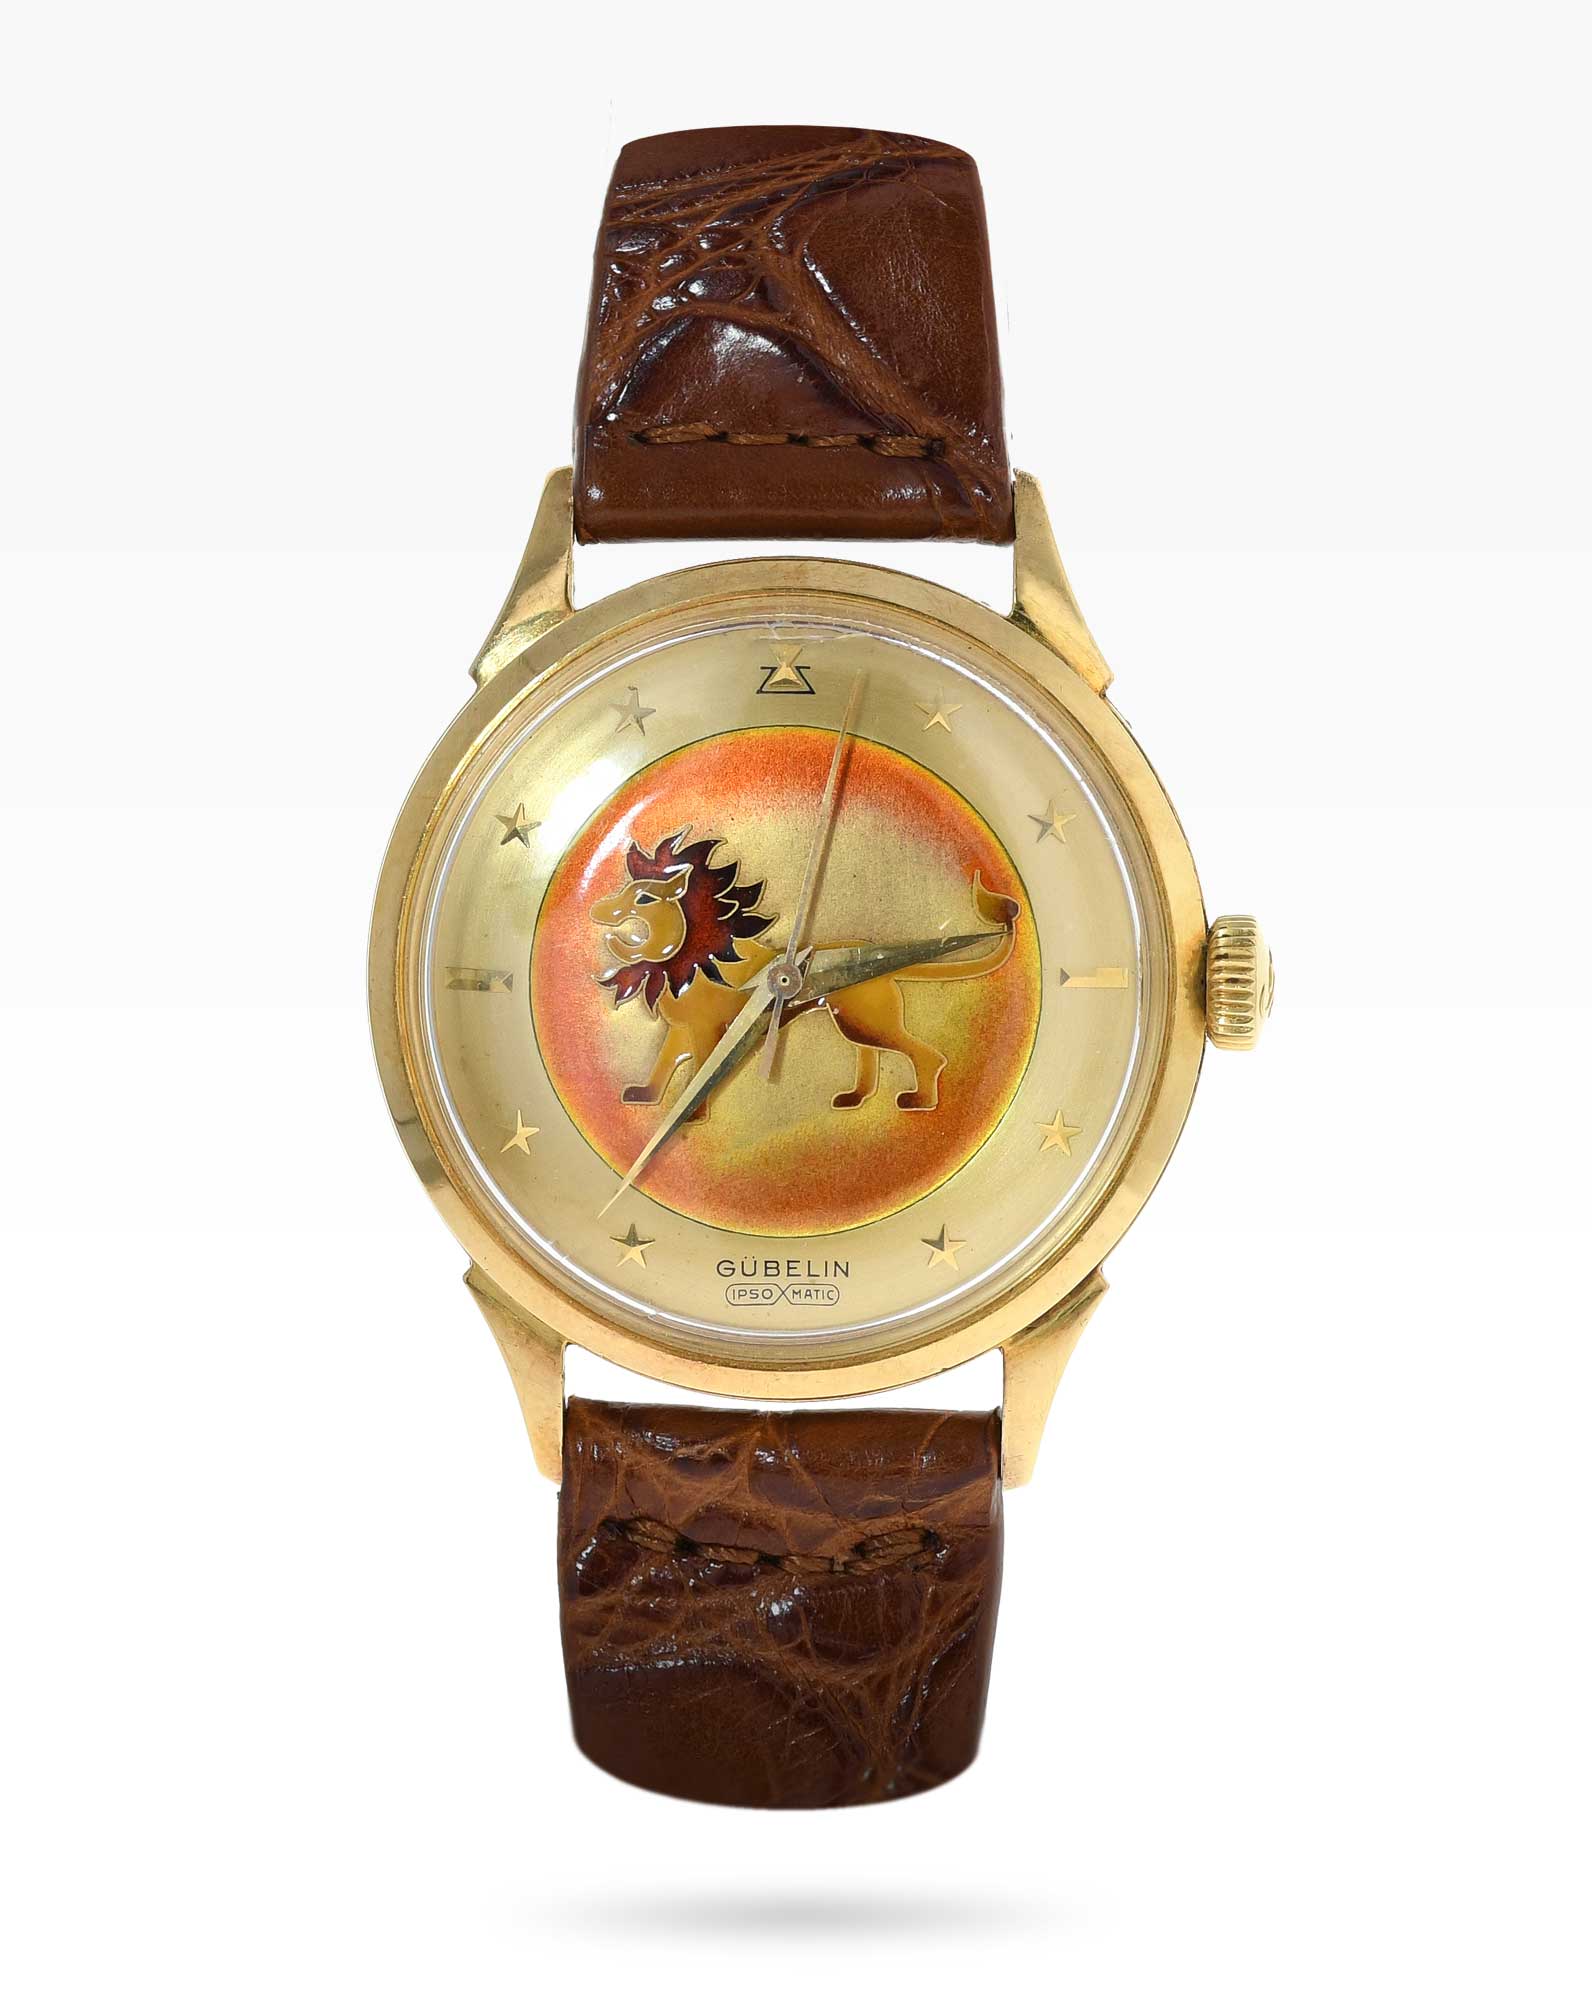 Rare Vintage Gubelin Ipso Matic Yellow Gold Watch with Enamel Painting of Leo, The Lion - 2ToneVintage Watches